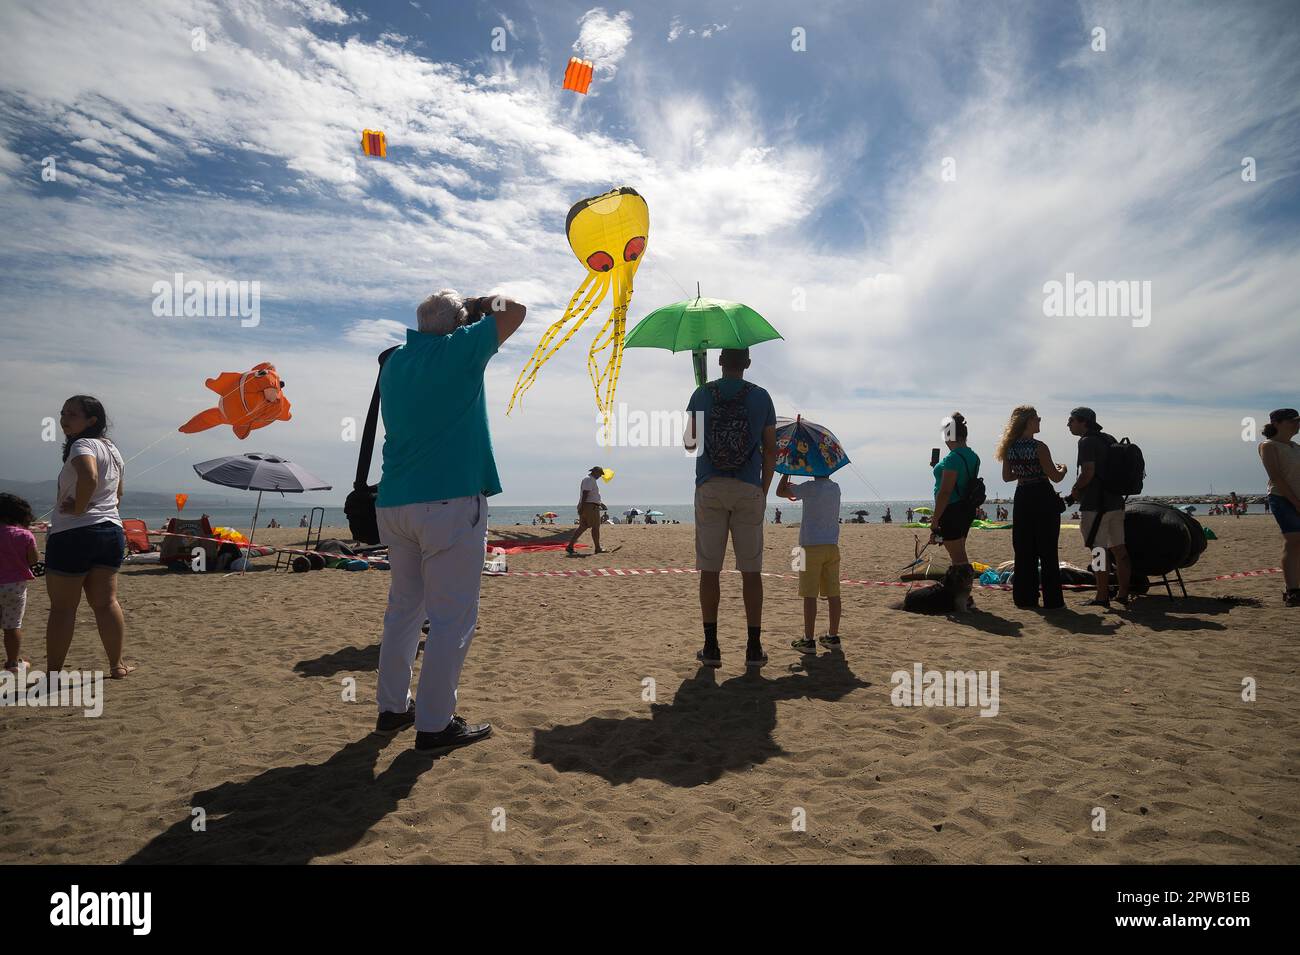 https://c8.alamy.com/comp/2PWB1EB/malaga-spain-29th-apr-2023-people-are-seen-watching-kites-floating-during-the-international-kite-exhibition-at-la-misericordia-beach-the-2023-international-kite-fest-brings-together-national-and-international-kite-pilots-who-will-participate-in-a-kite-exhibition-festival-and-acrobatic-shows-for-two-days-on-the-beaches-of-the-city-credit-sopa-images-limitedalamy-live-news-2PWB1EB.jpg